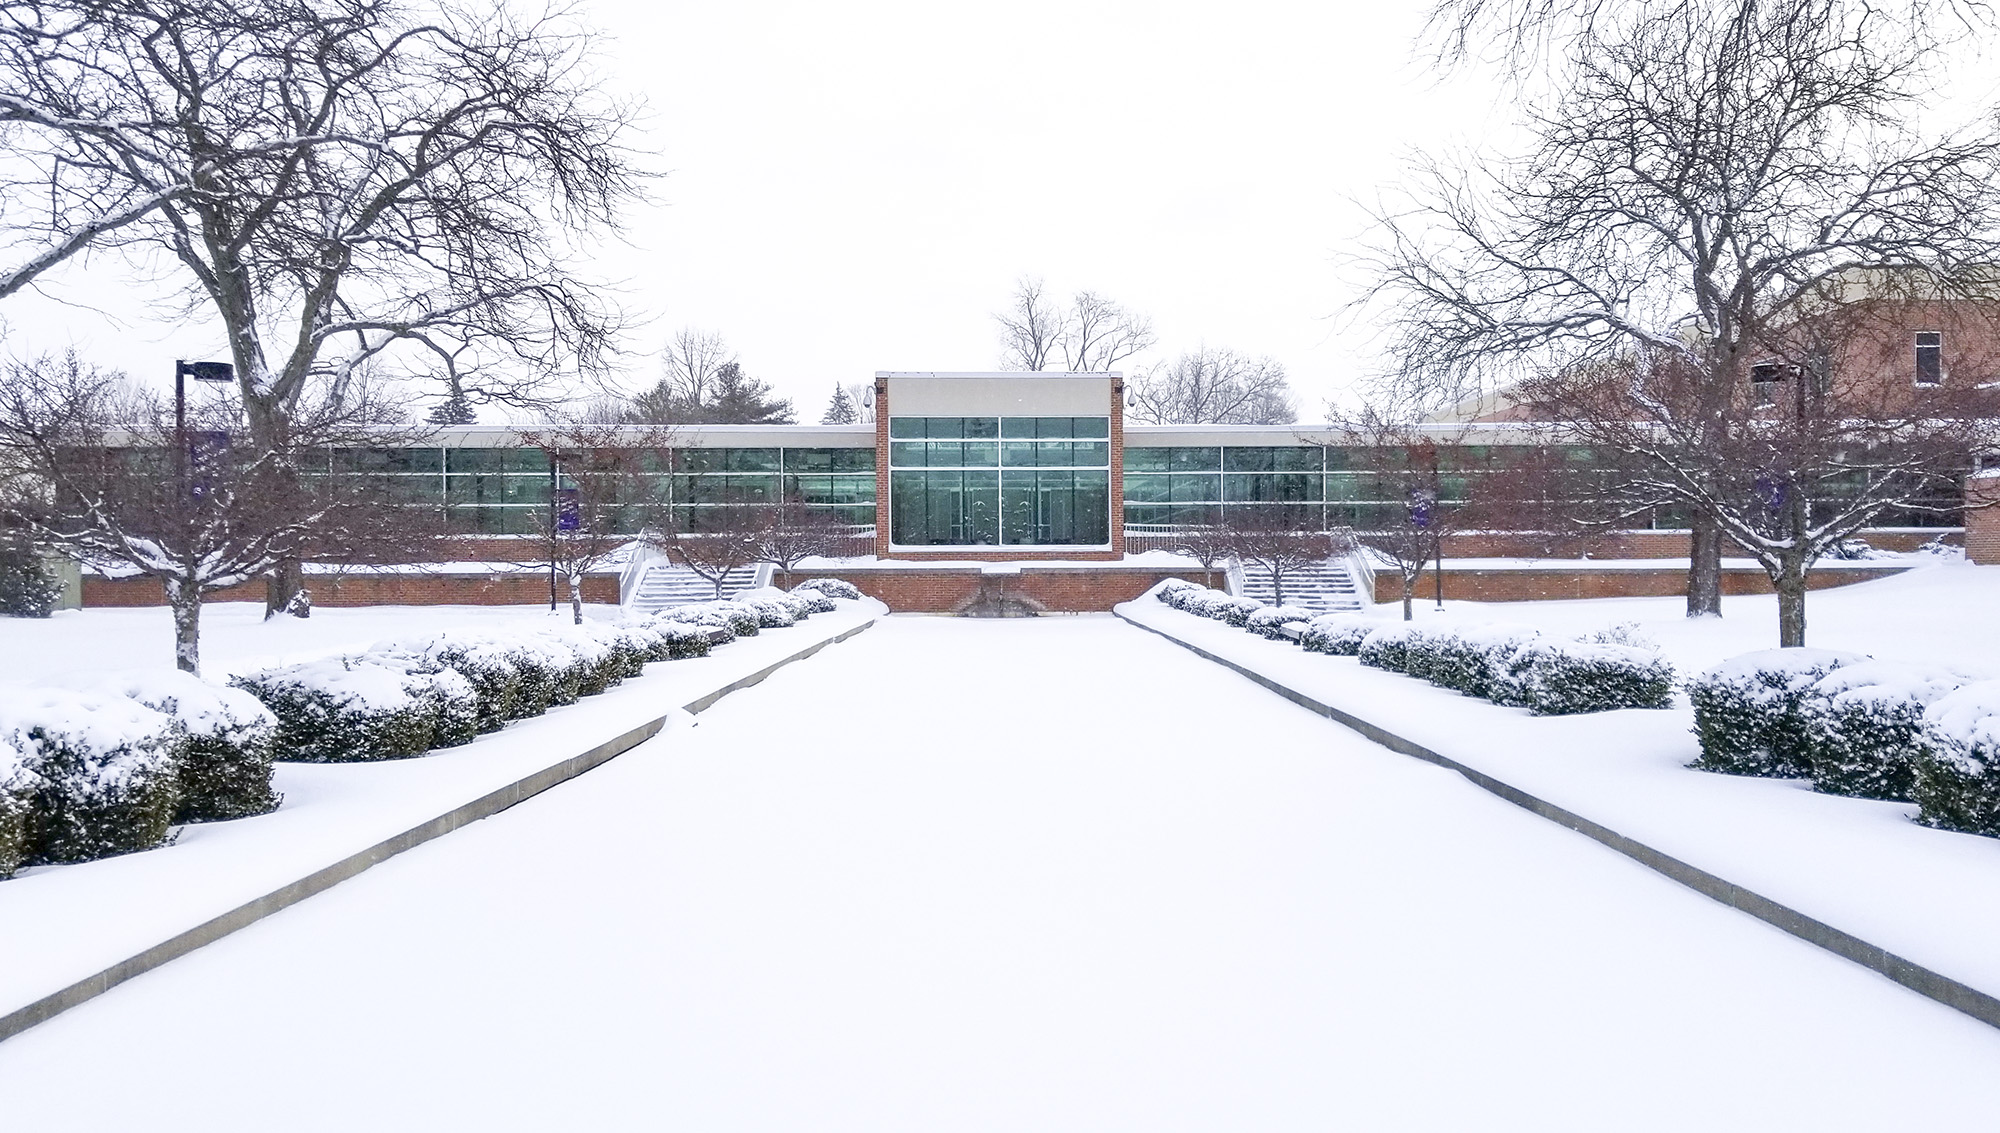 An exterior view of the main entrance to KCC's North Avenue campus in Battle Creek, covered in snow.